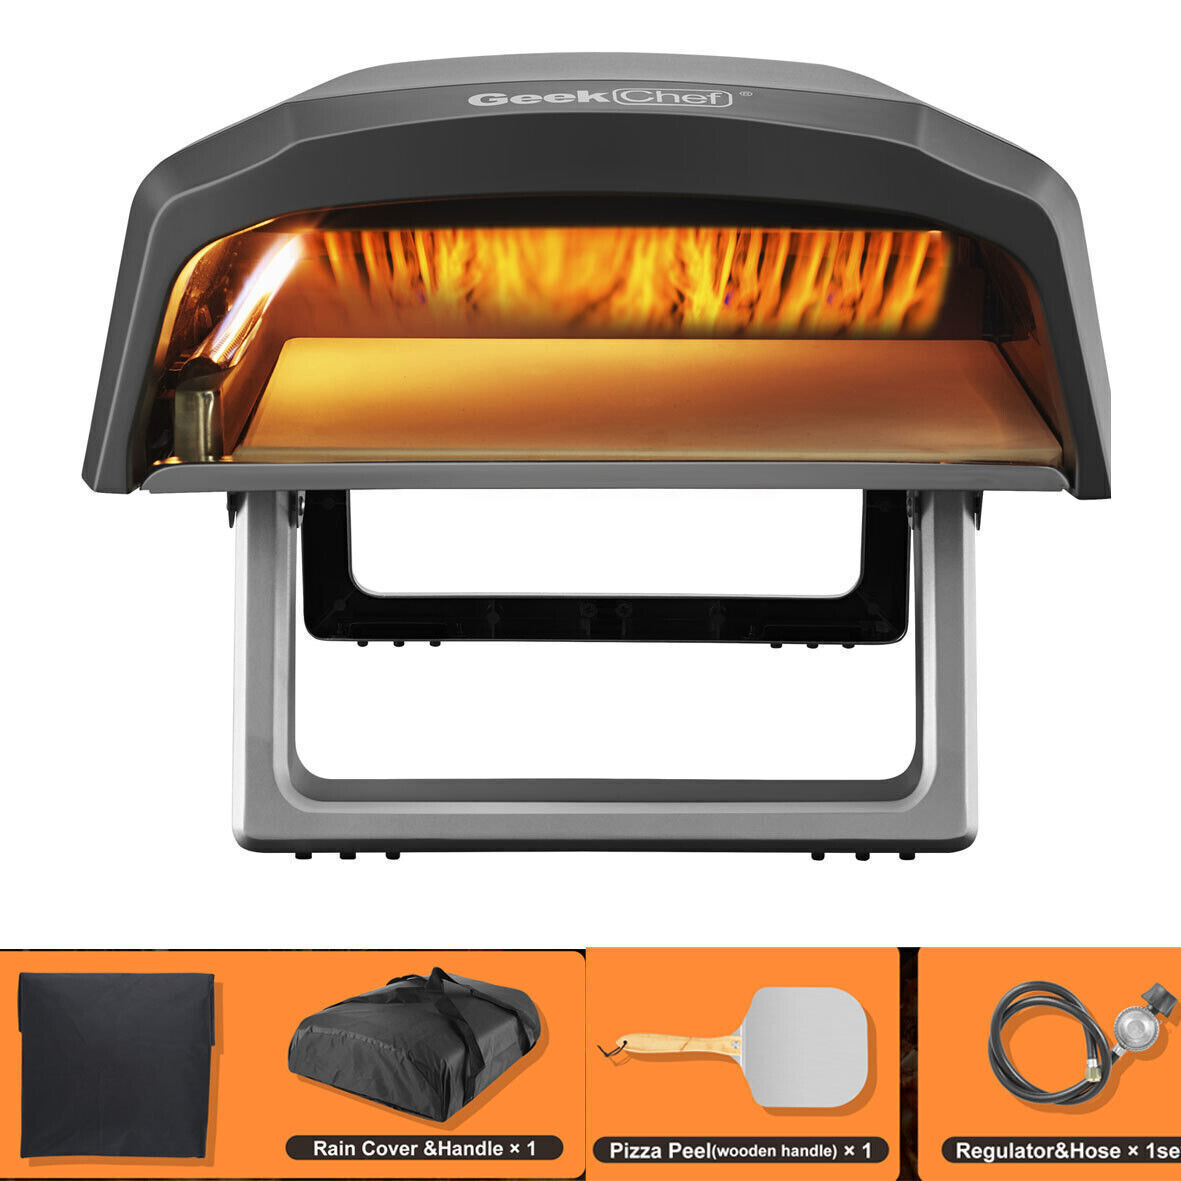 Geek Chef Portable Outdoor Pizza Oven - Gas Fired, Fire & Stone Outdoor Oven Us